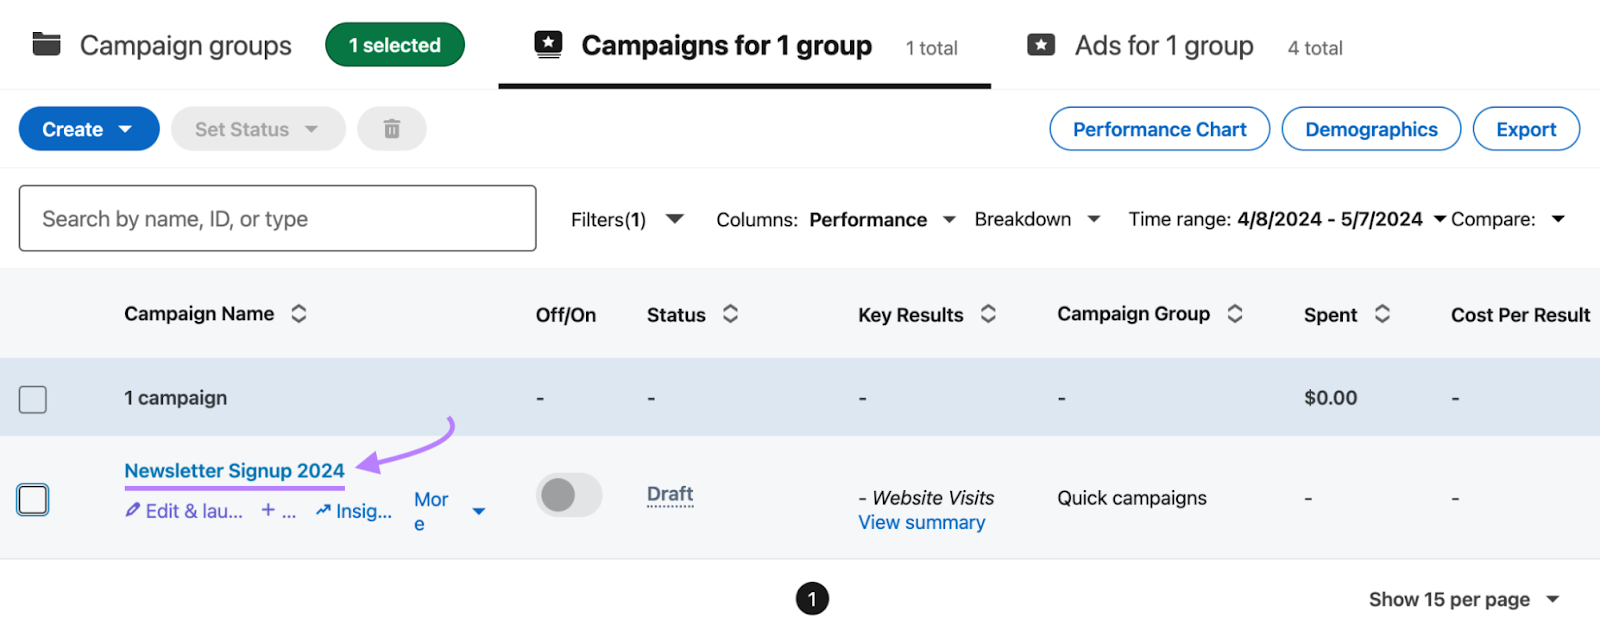 Newsletter signup 2024 ads campaign highlighted in LinkedIn campaigns dashboard